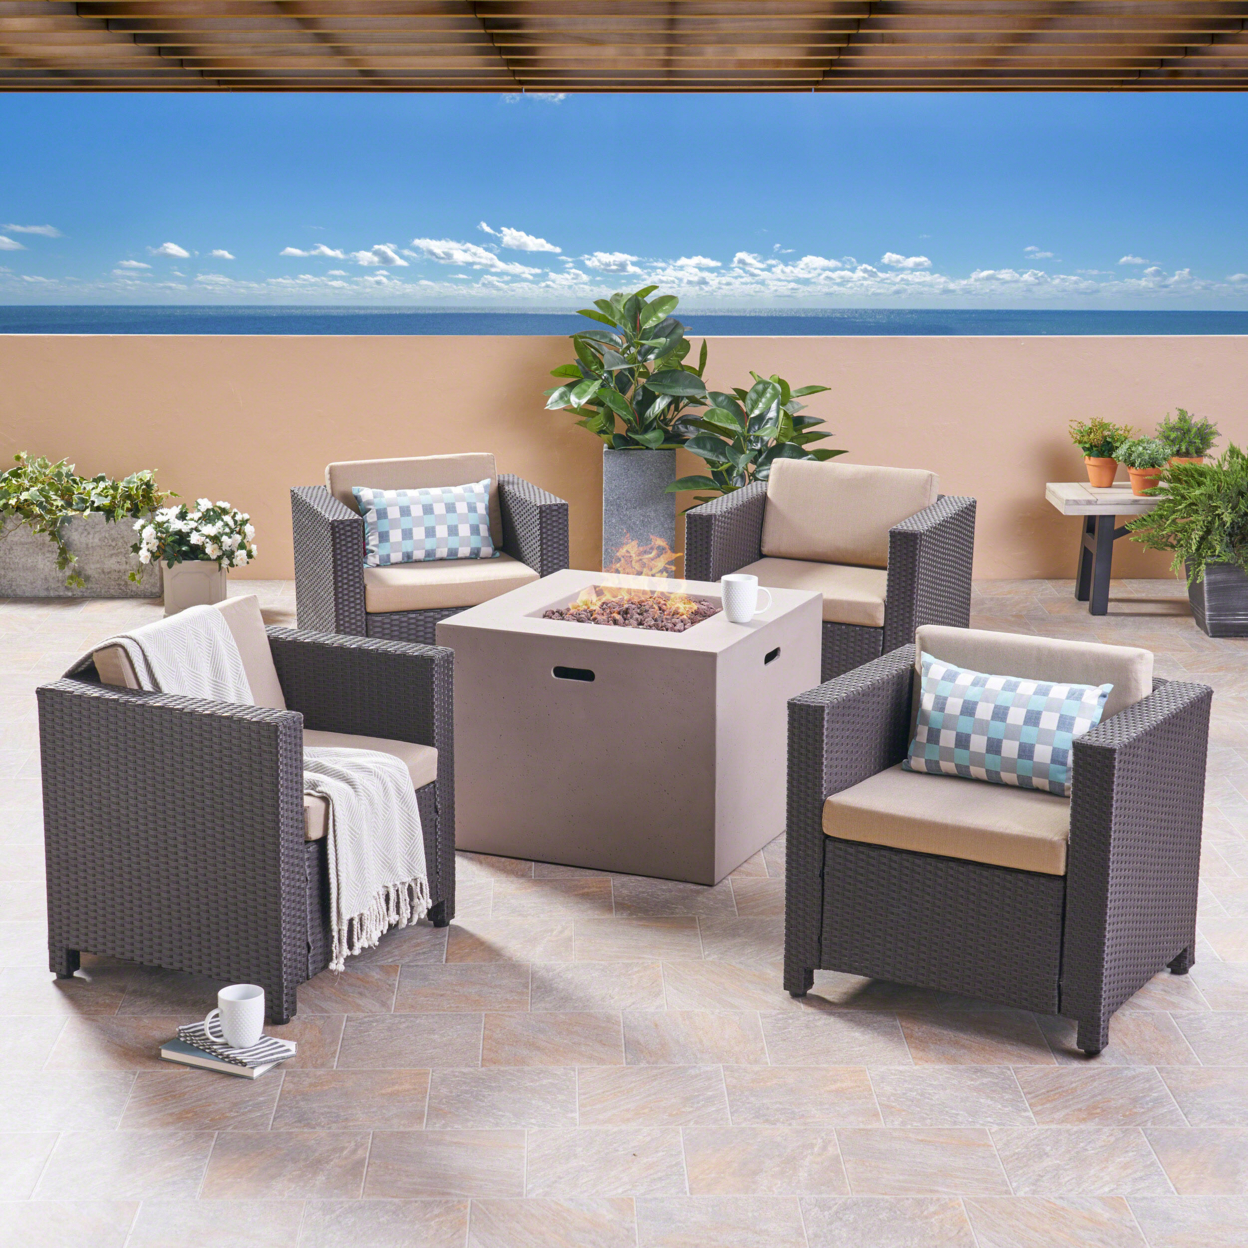 Icey Outdoor 4 Piece Club Chair Set With Square Fire Pit - Gray + Dark Gray